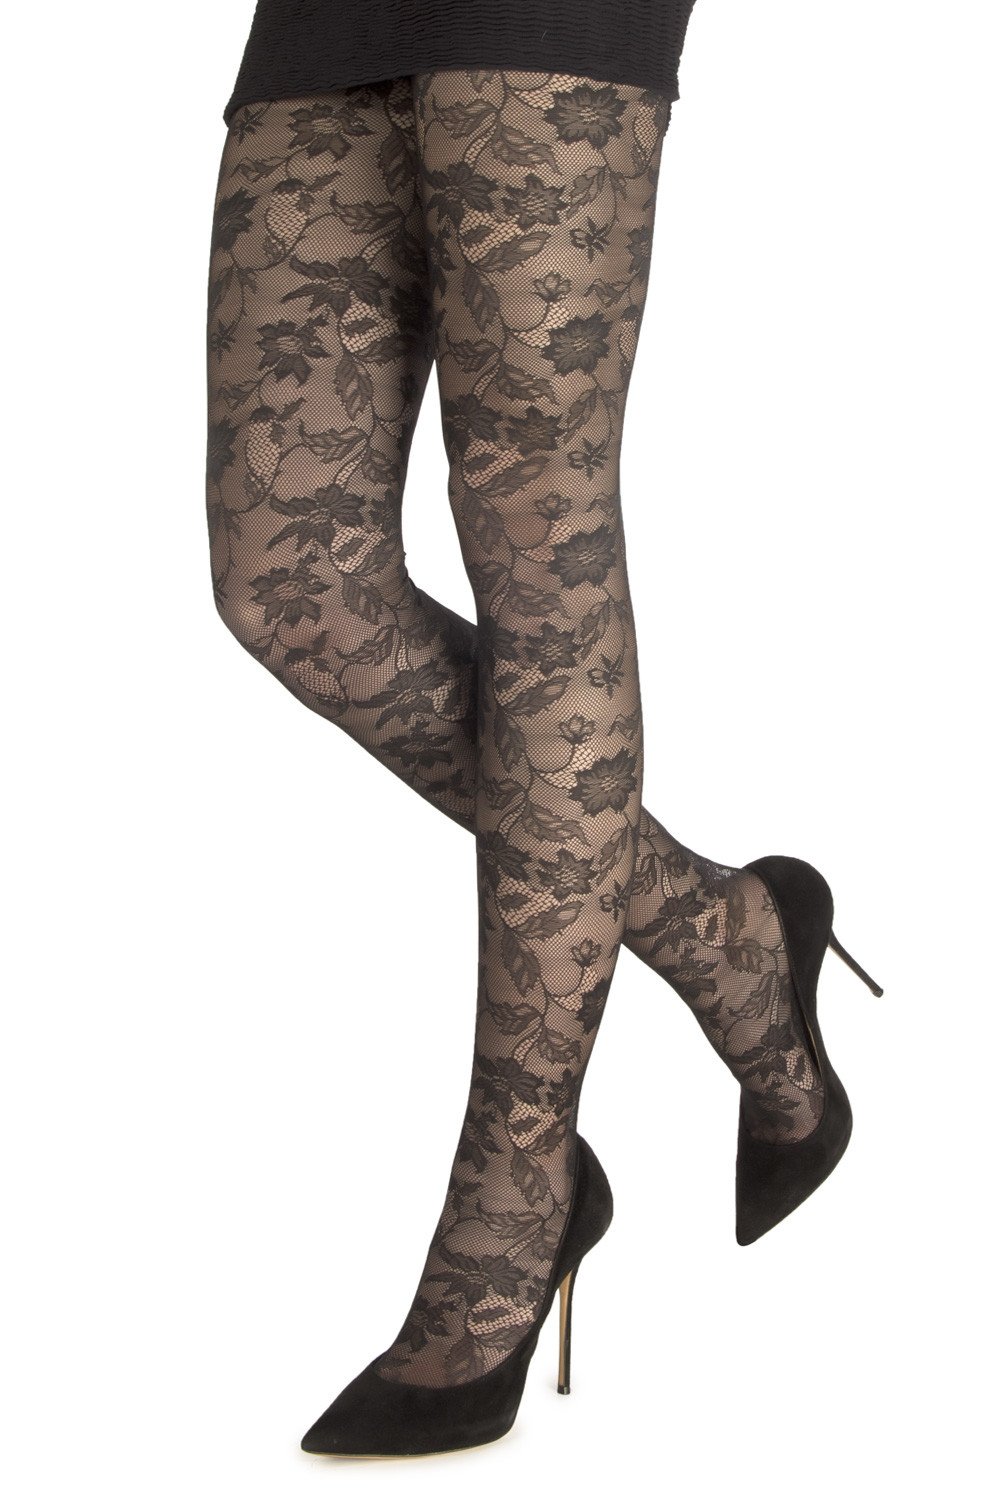 Contemporary Lace Tights, Tights & Hosiery, Women